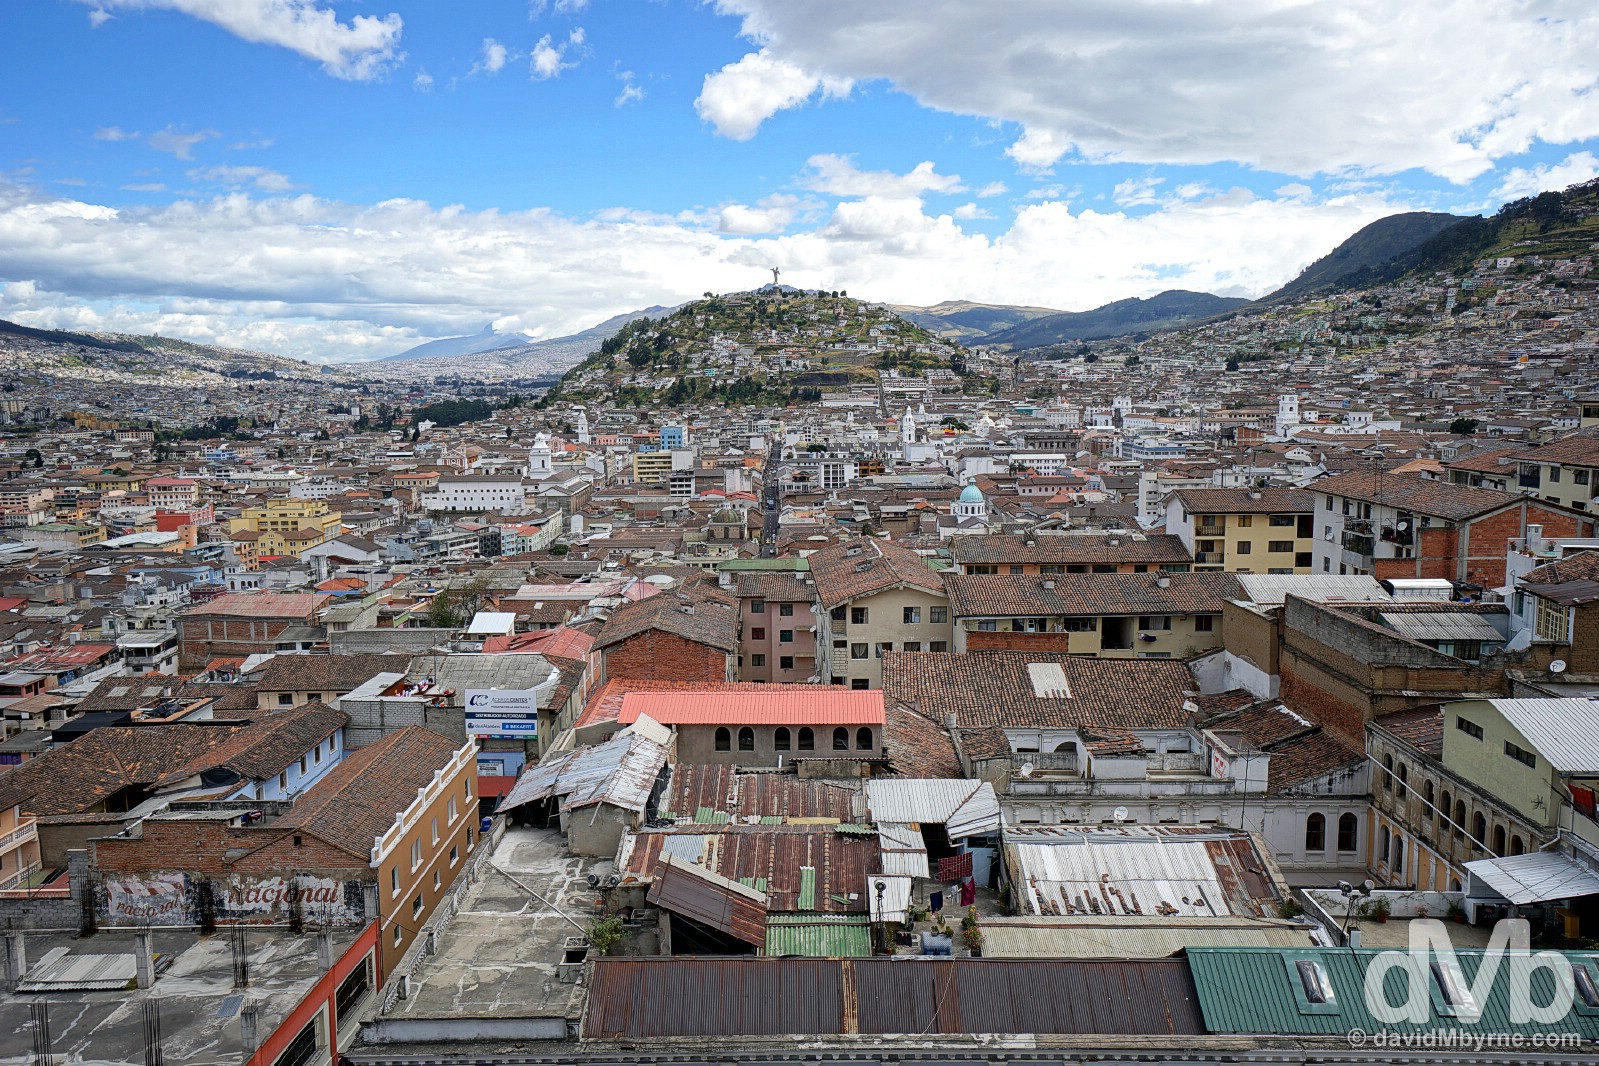 A portion of Quito, Ecuador, as seen from the bell tower of the Gothic Basilica del Voto Nacional. July 4, 2015.